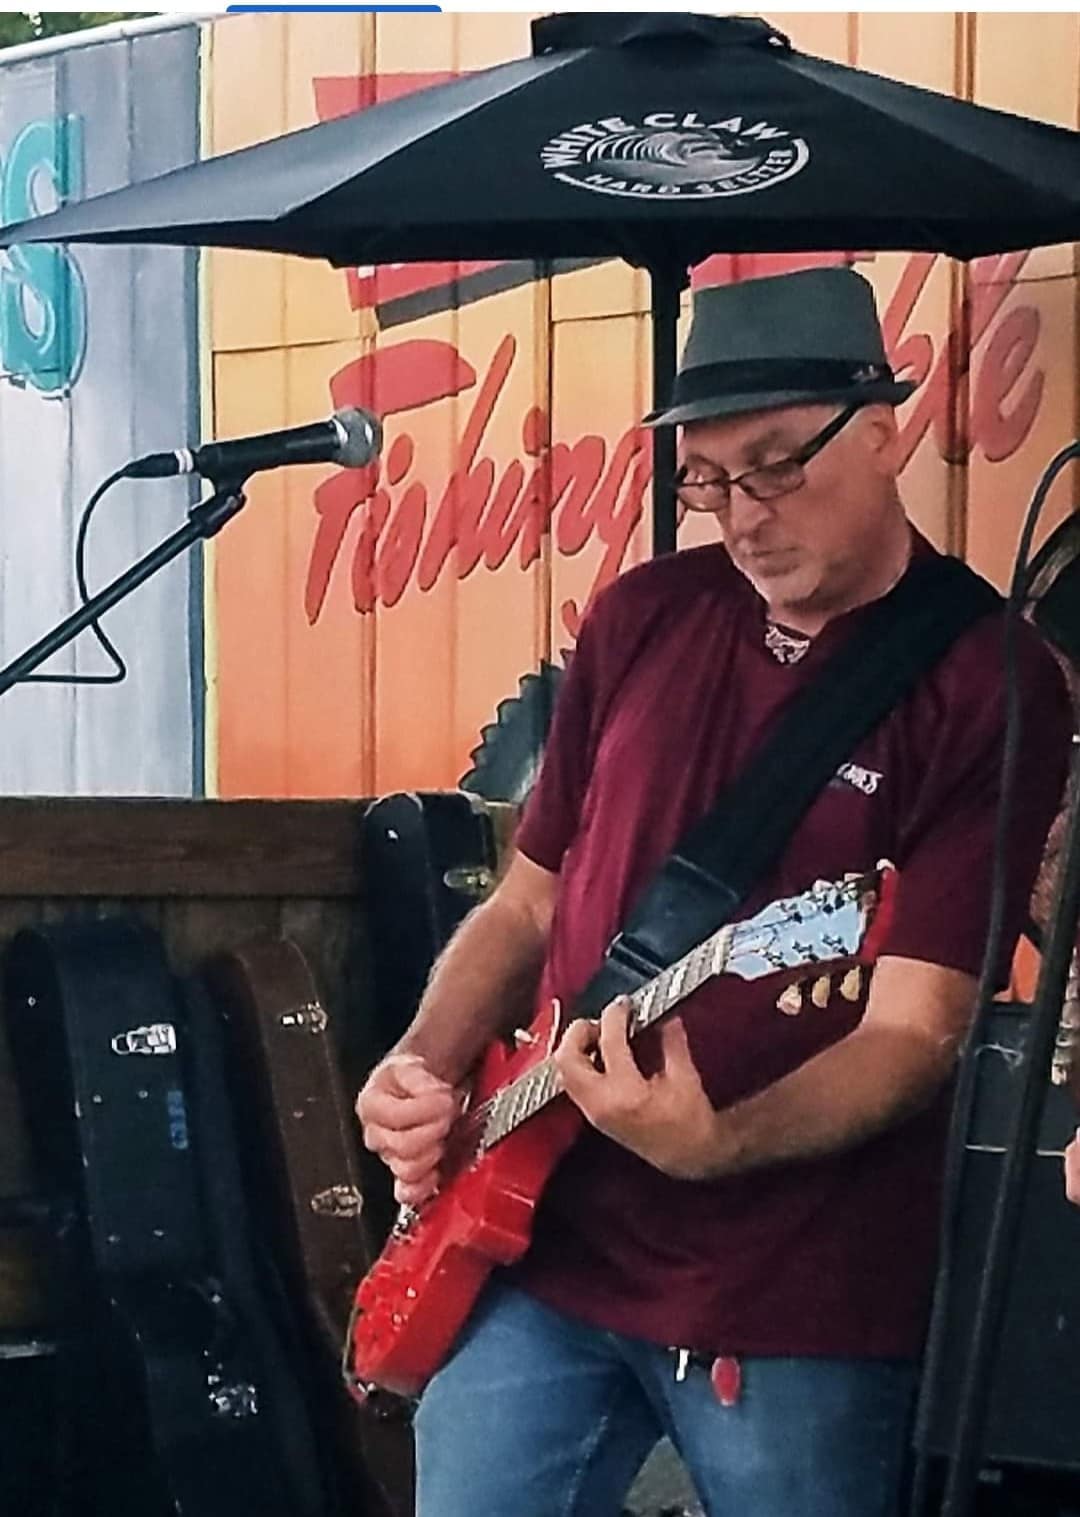 Tim Guilliams music at the dock house